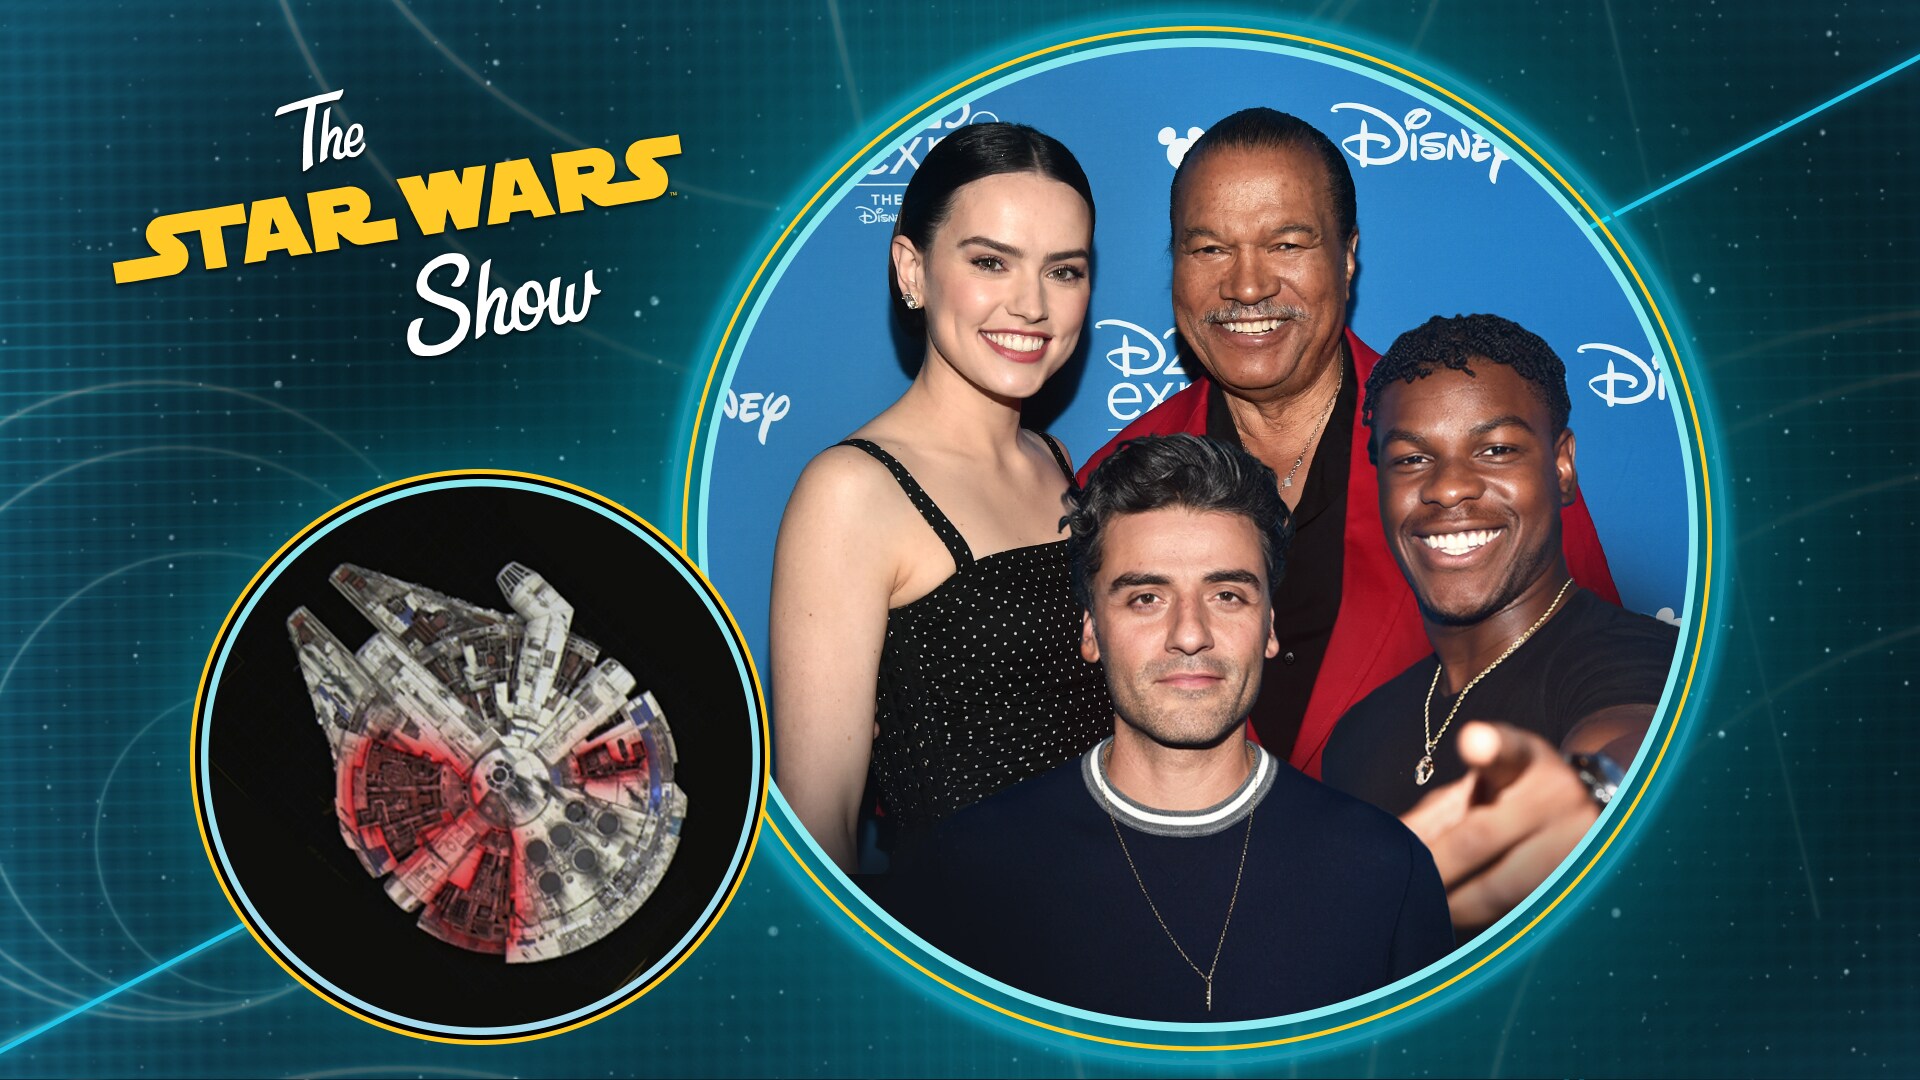 The Rise of Skywalker Cast is Excited for December